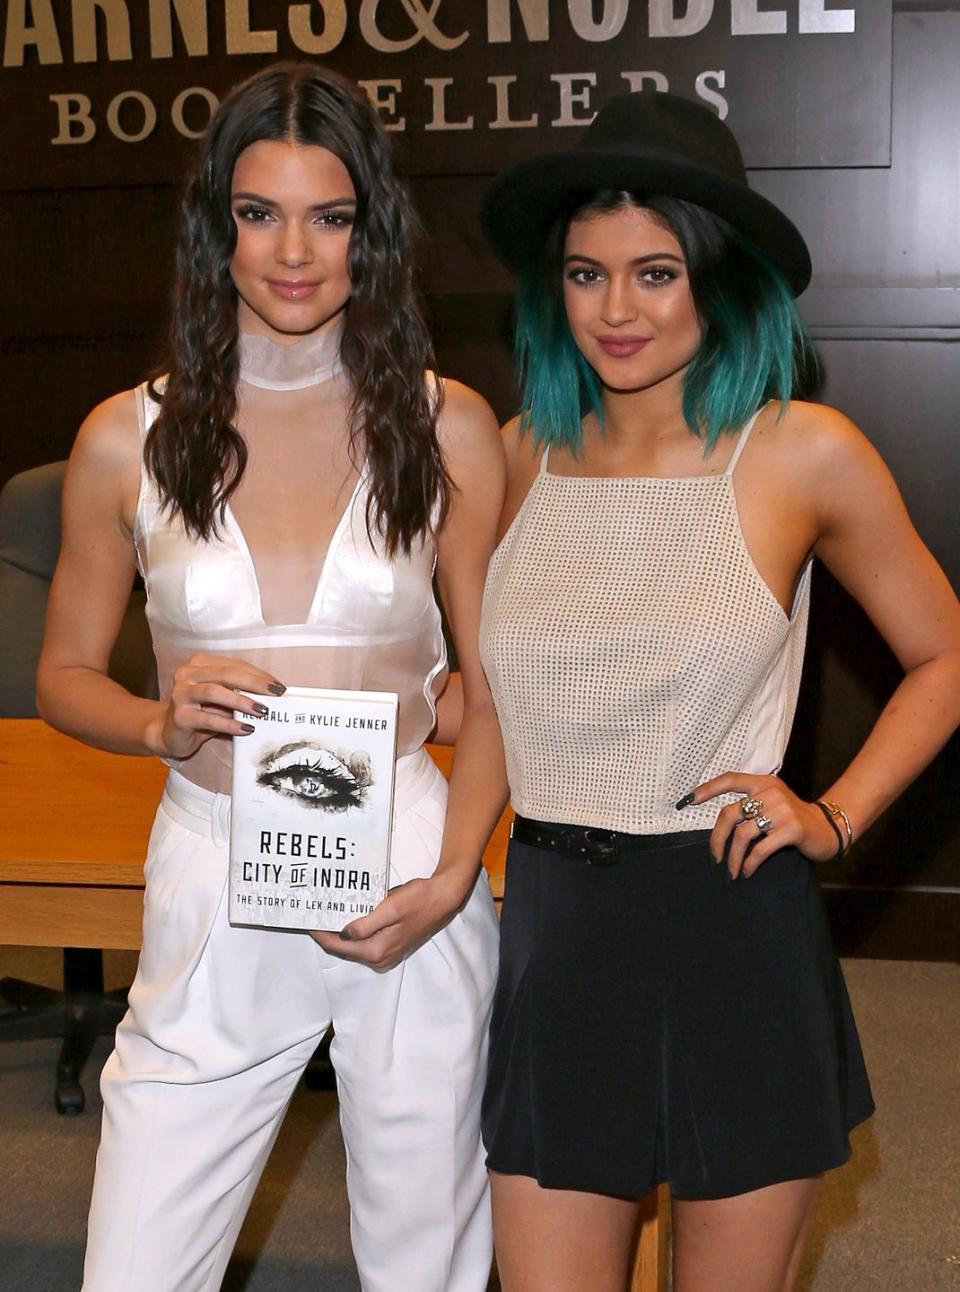 13) Kendall and Kylie Jenner